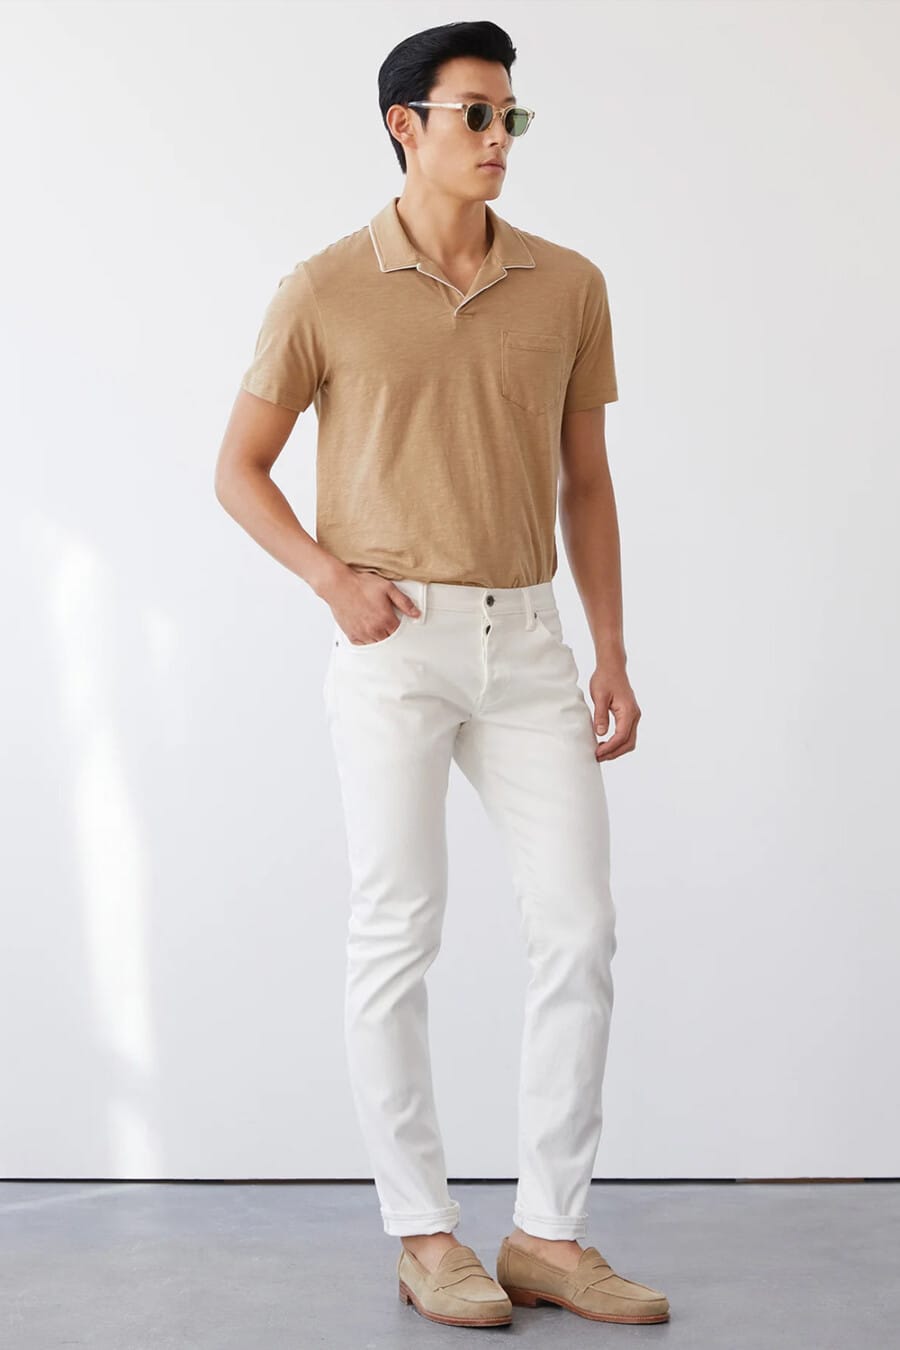 Men's white jeans, tucked in brown open collar polo shirt and beige suede penny loafers outfit